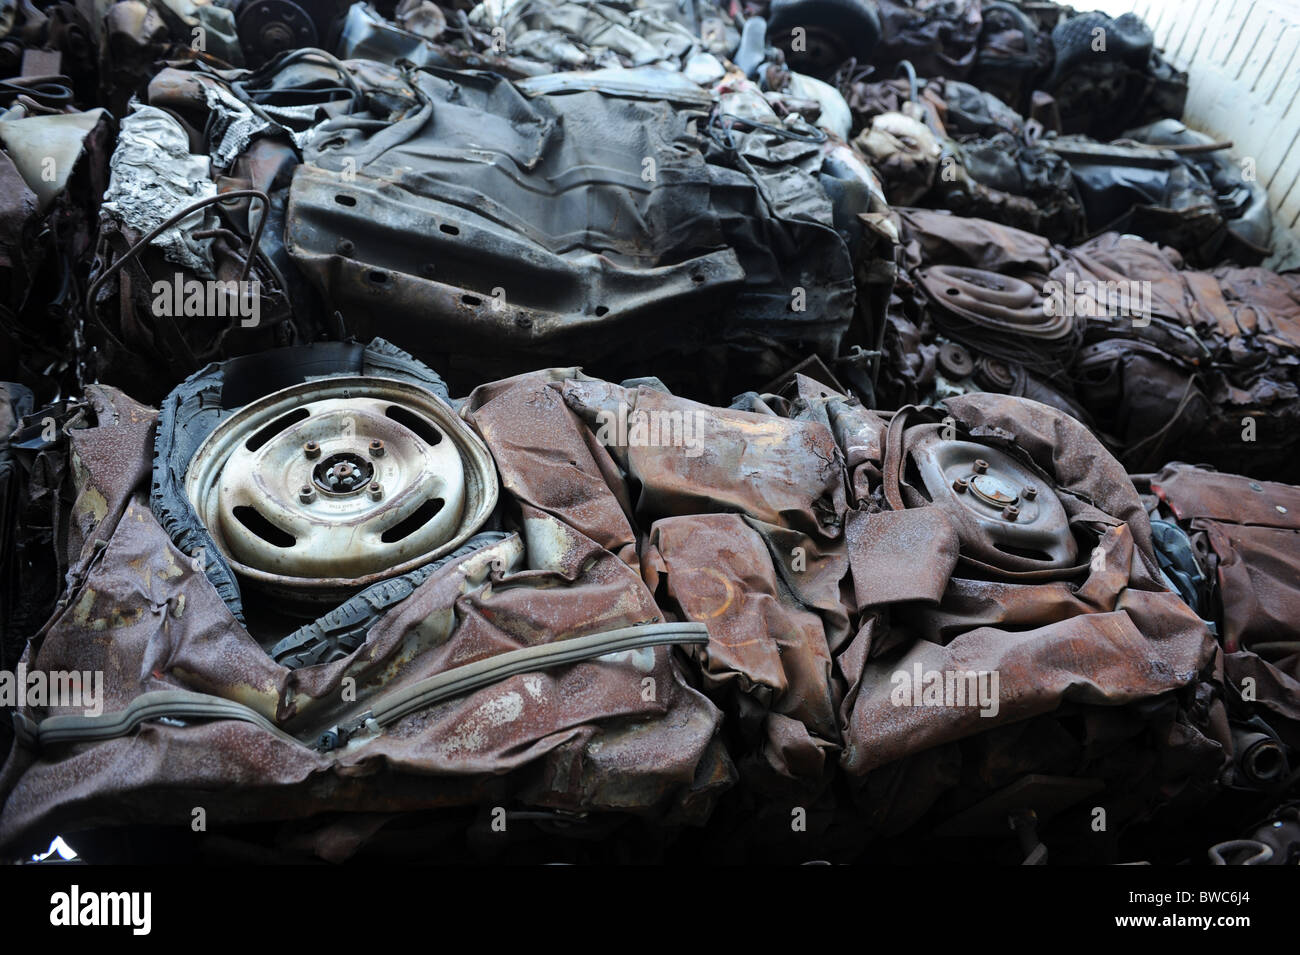 Scrapped cars crushed Stock Photo